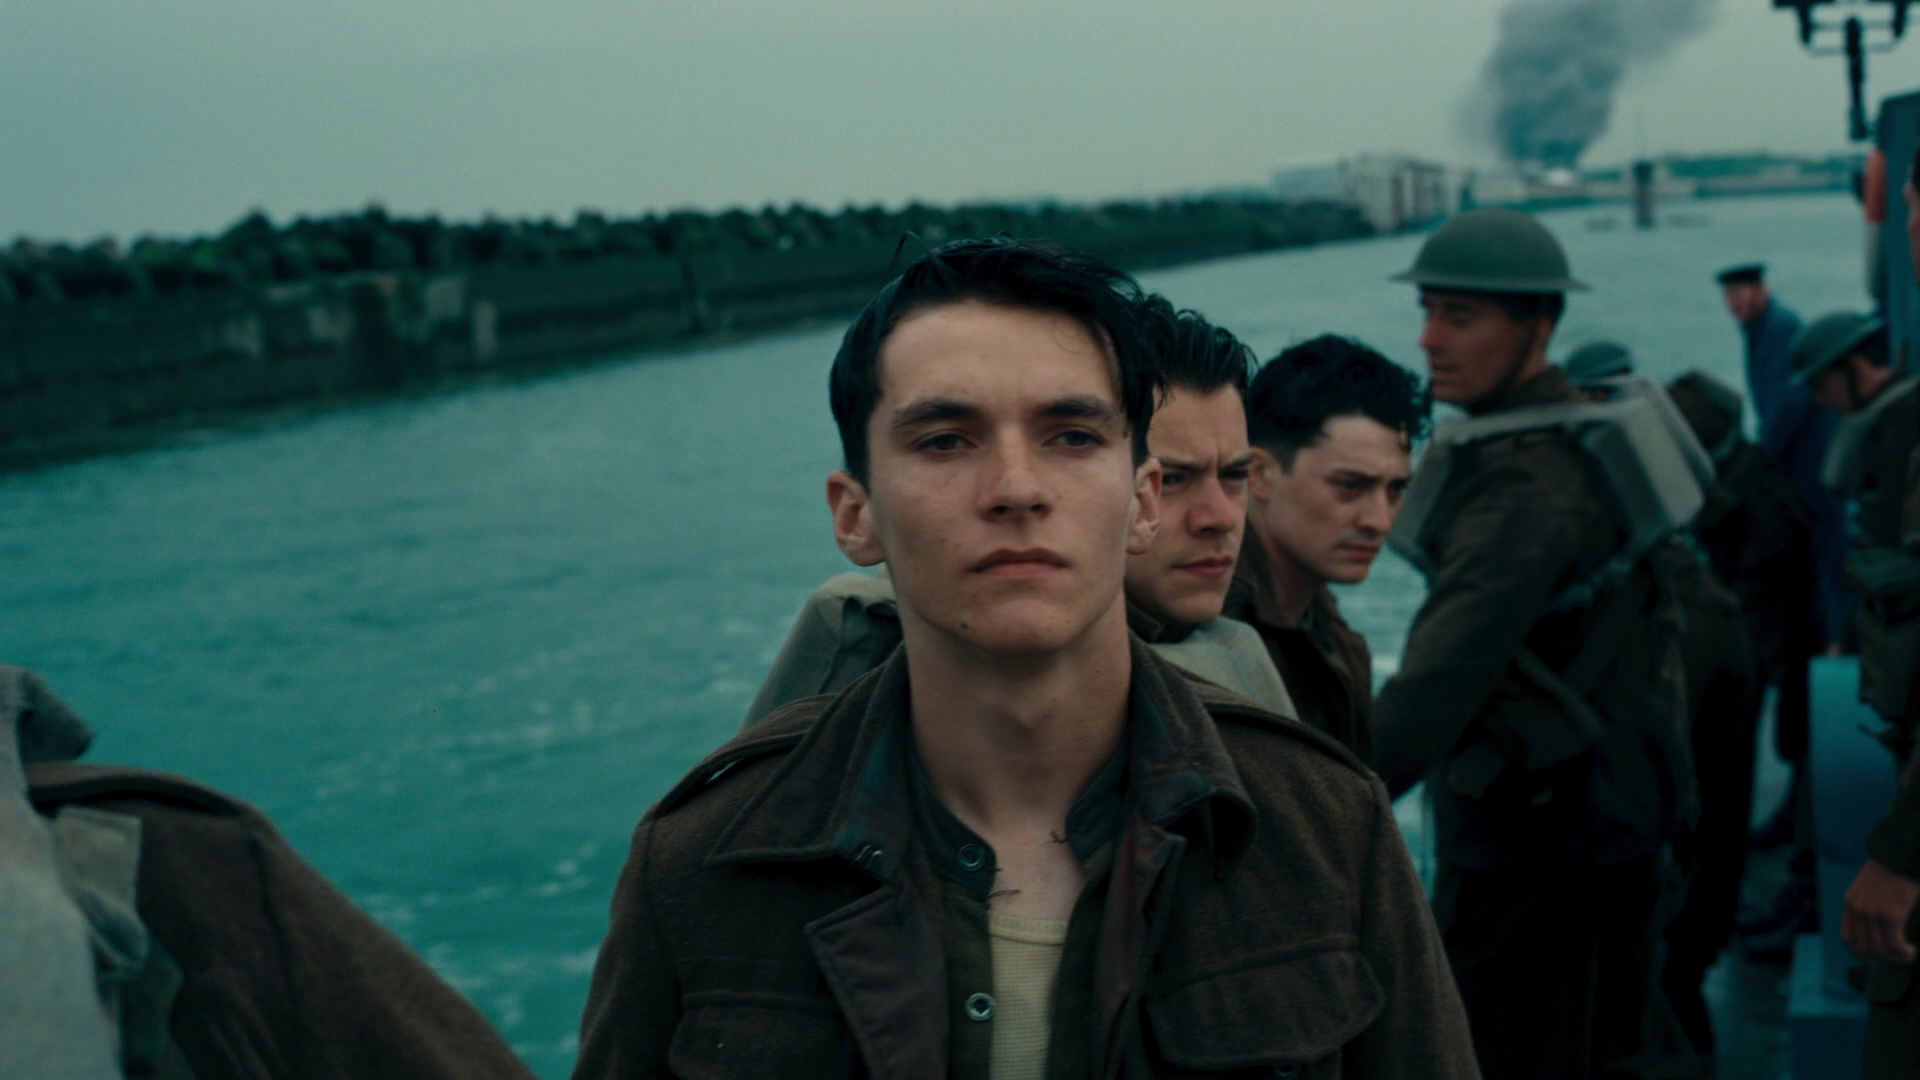 ؿ̶/ؿ˶˴ж Dunkirk.2017.1080p.BluRay.x264.DTS-HD.MA.5.1-FGT 9.41GB-6.png